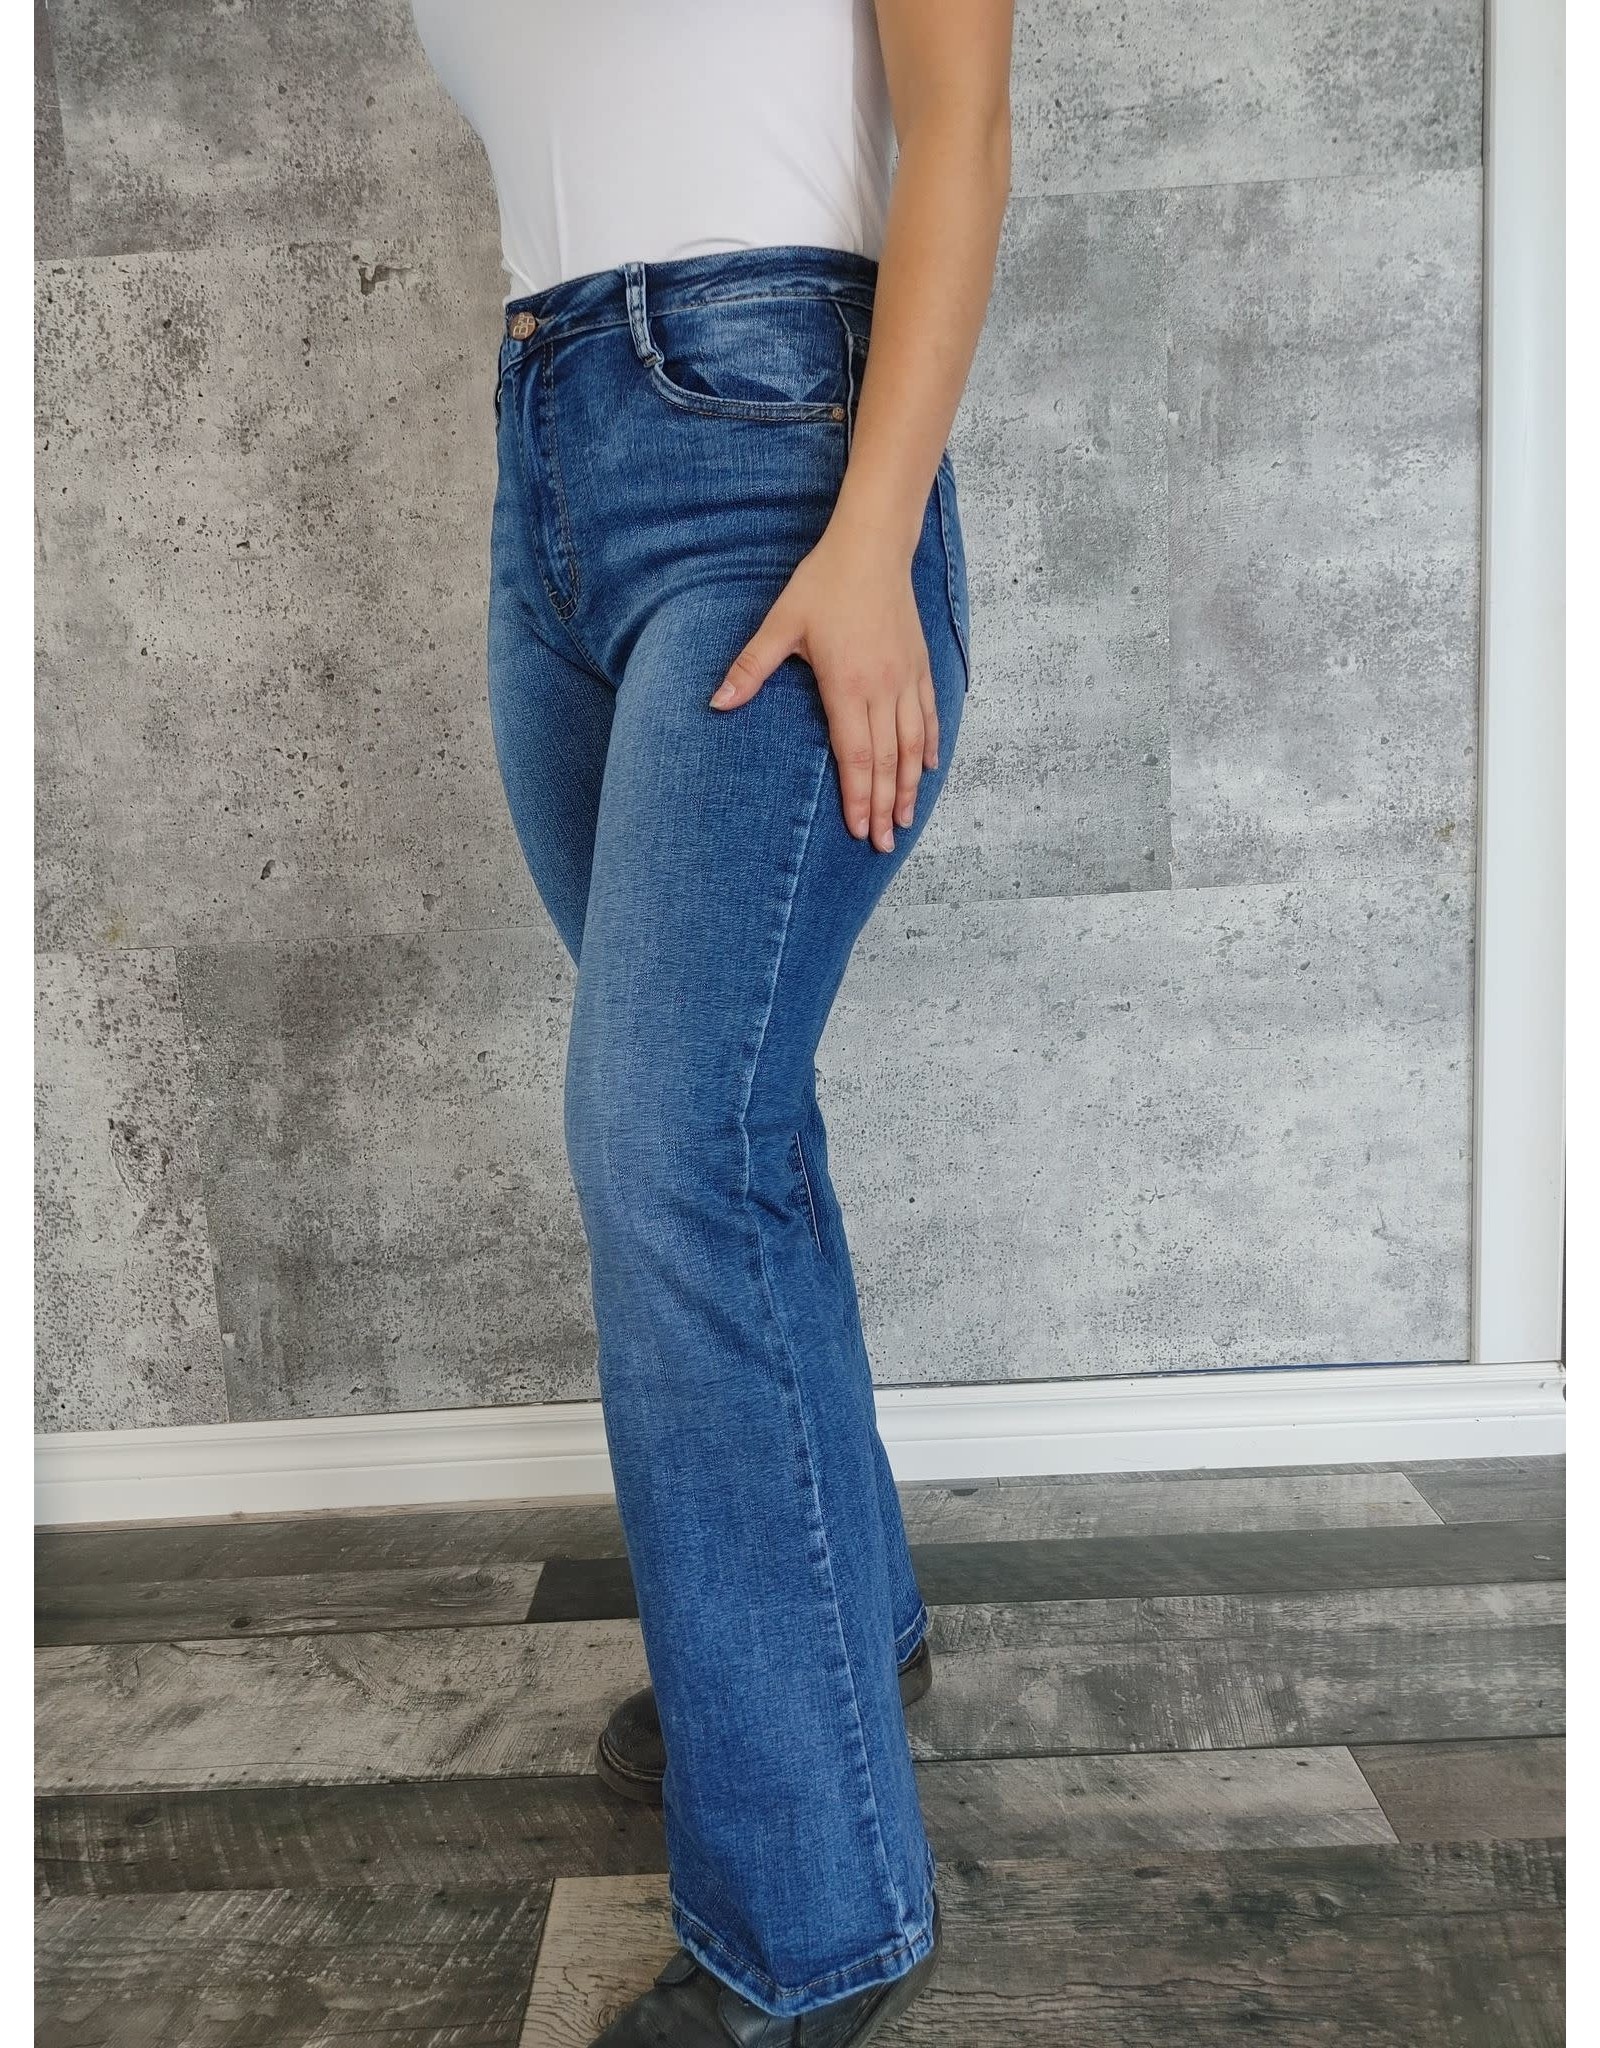 BH JEANS BHJEANS-JEANS-BJ-001